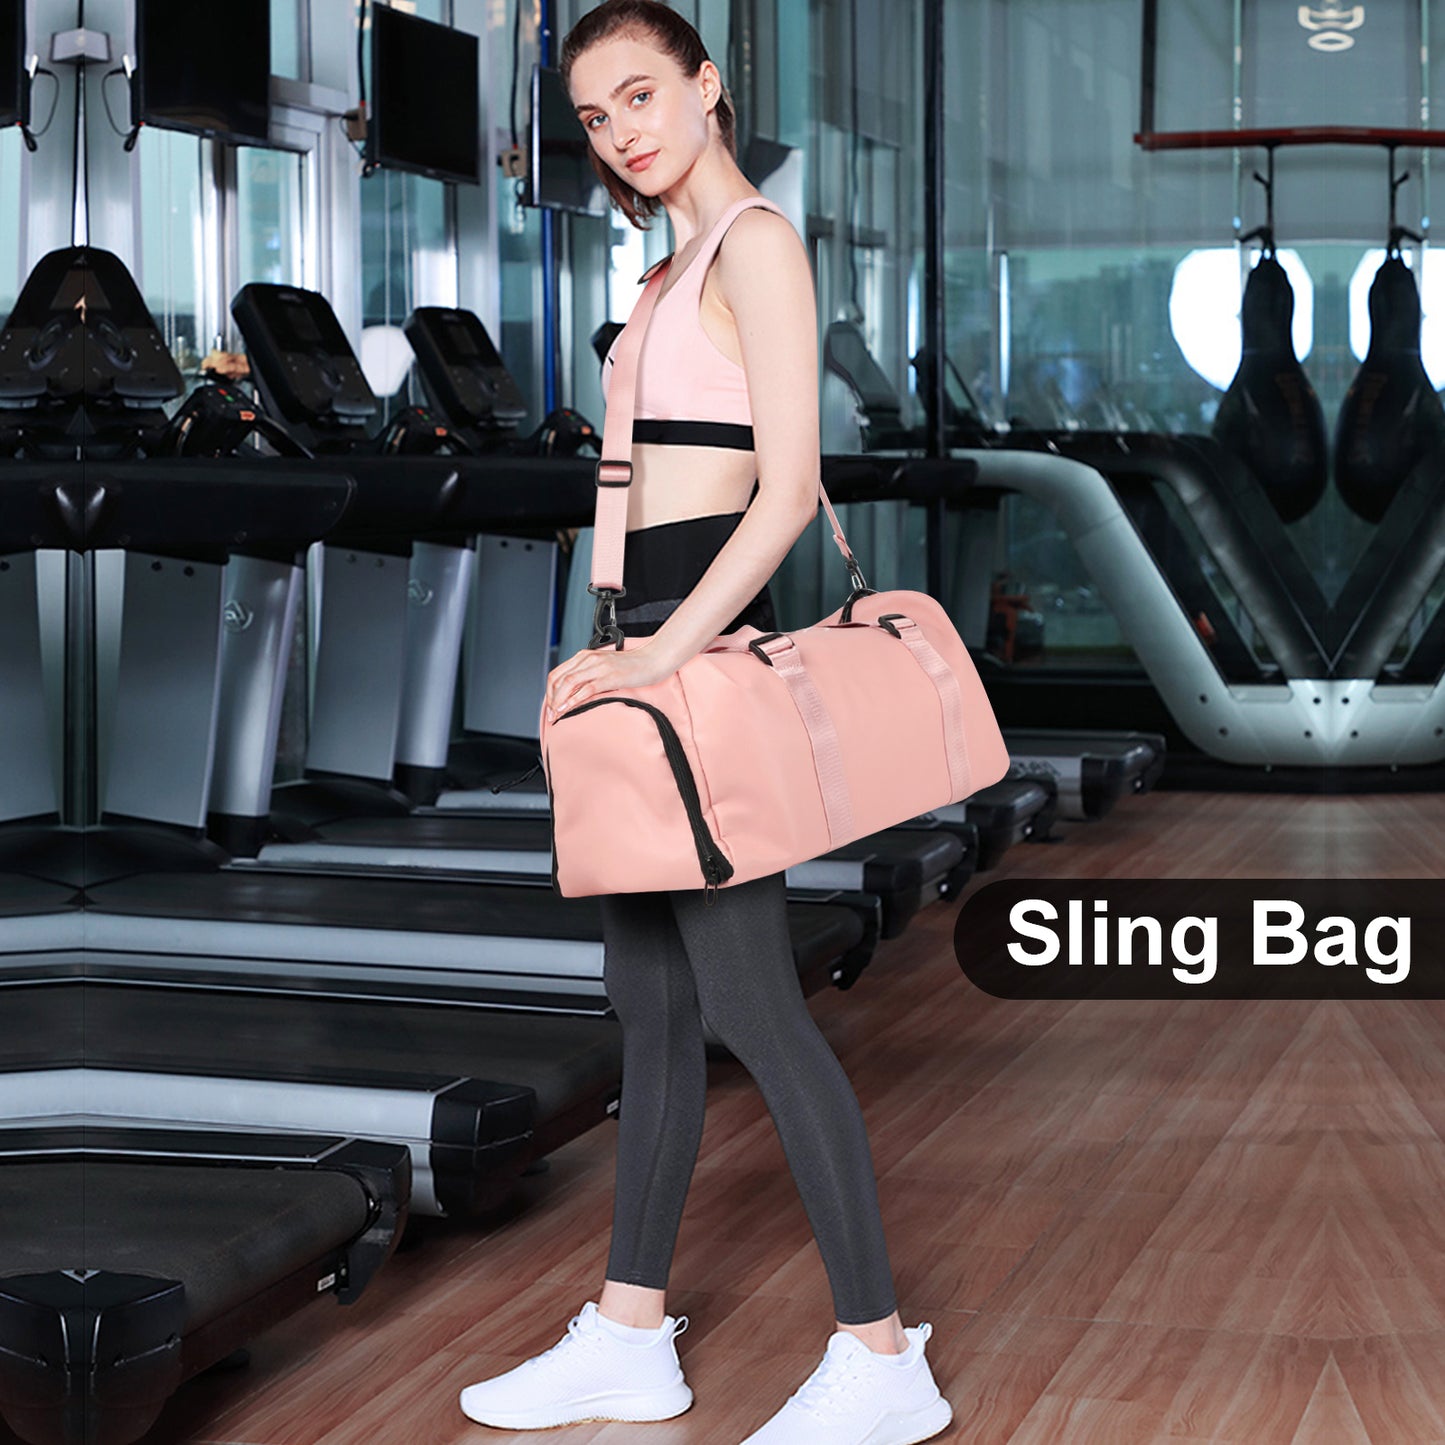 YSSOA Gym Bag for Women and Men, Waterproof Duffel Bag Shoes Compartment, Lightweight Carry